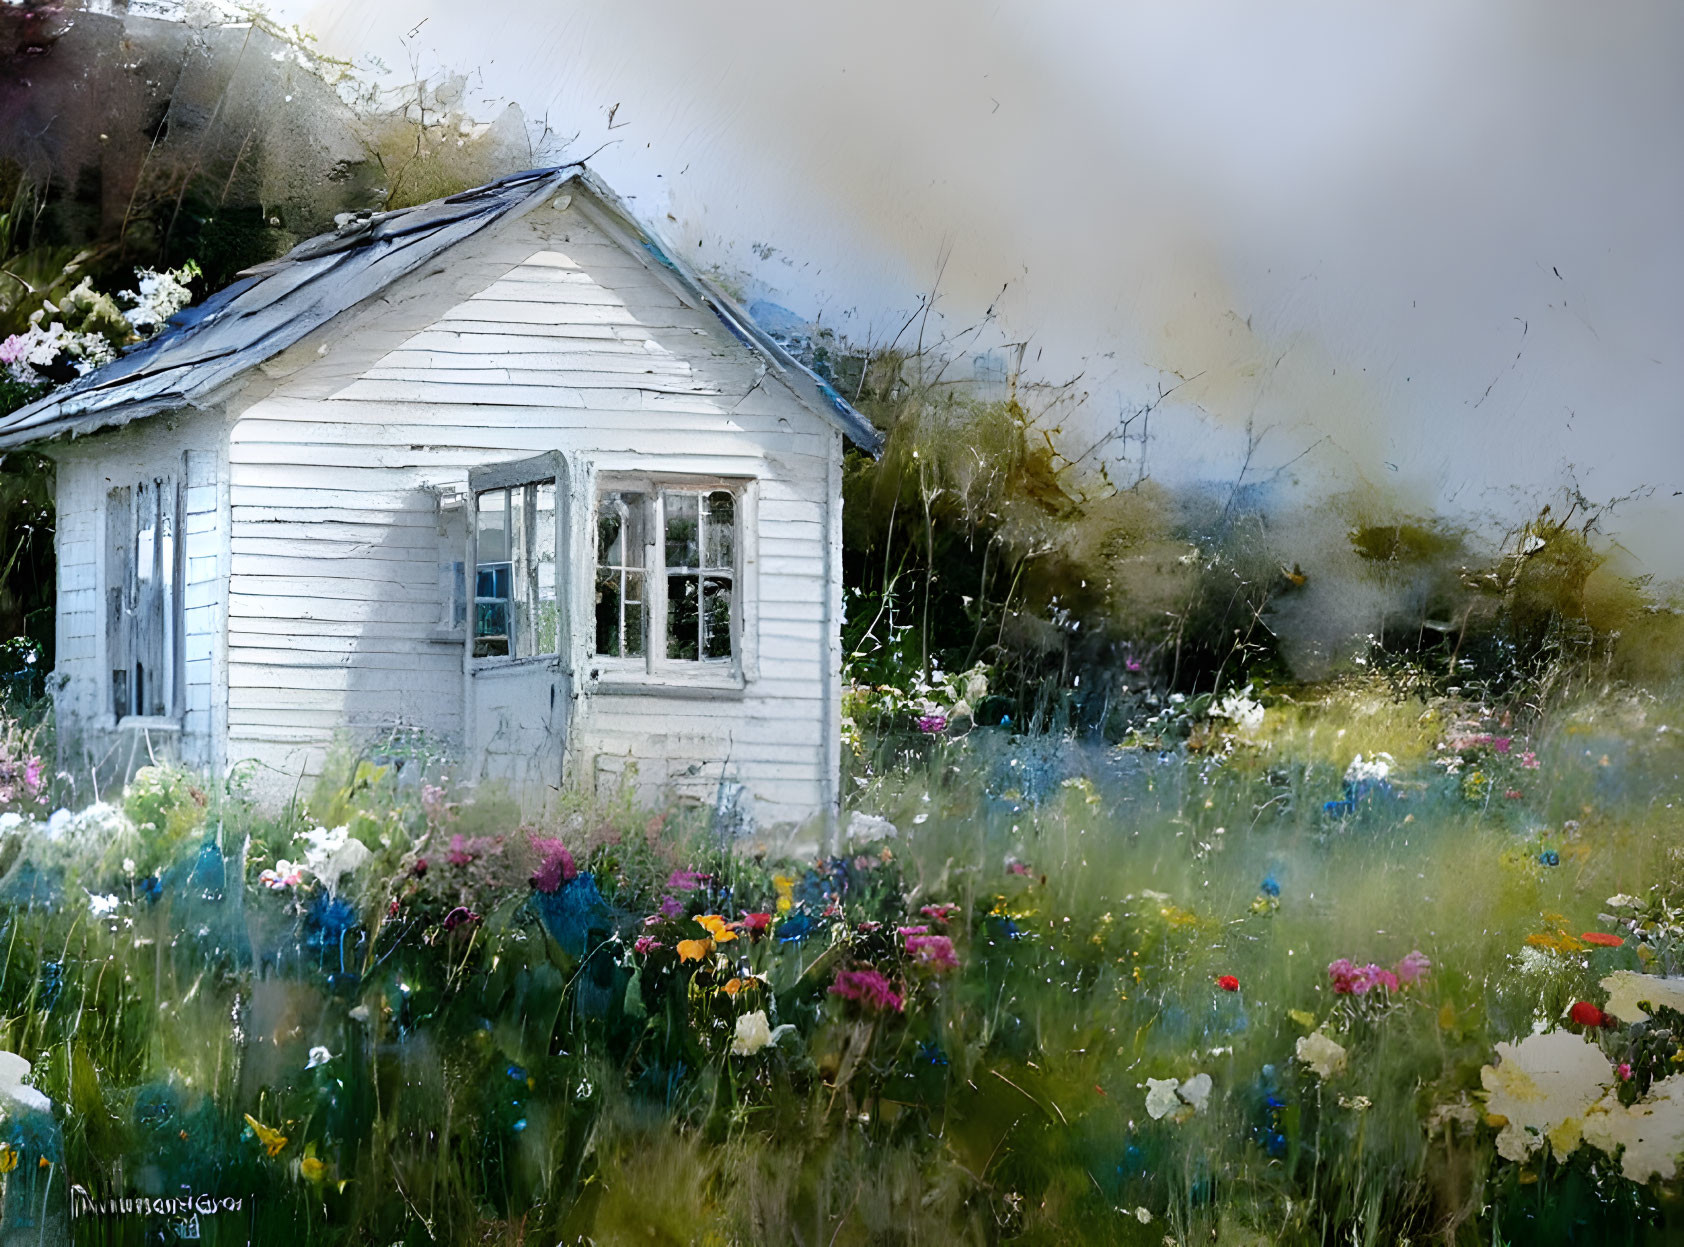 White Cottage Surrounded by Vibrant Floral Meadow and Blurred Trees